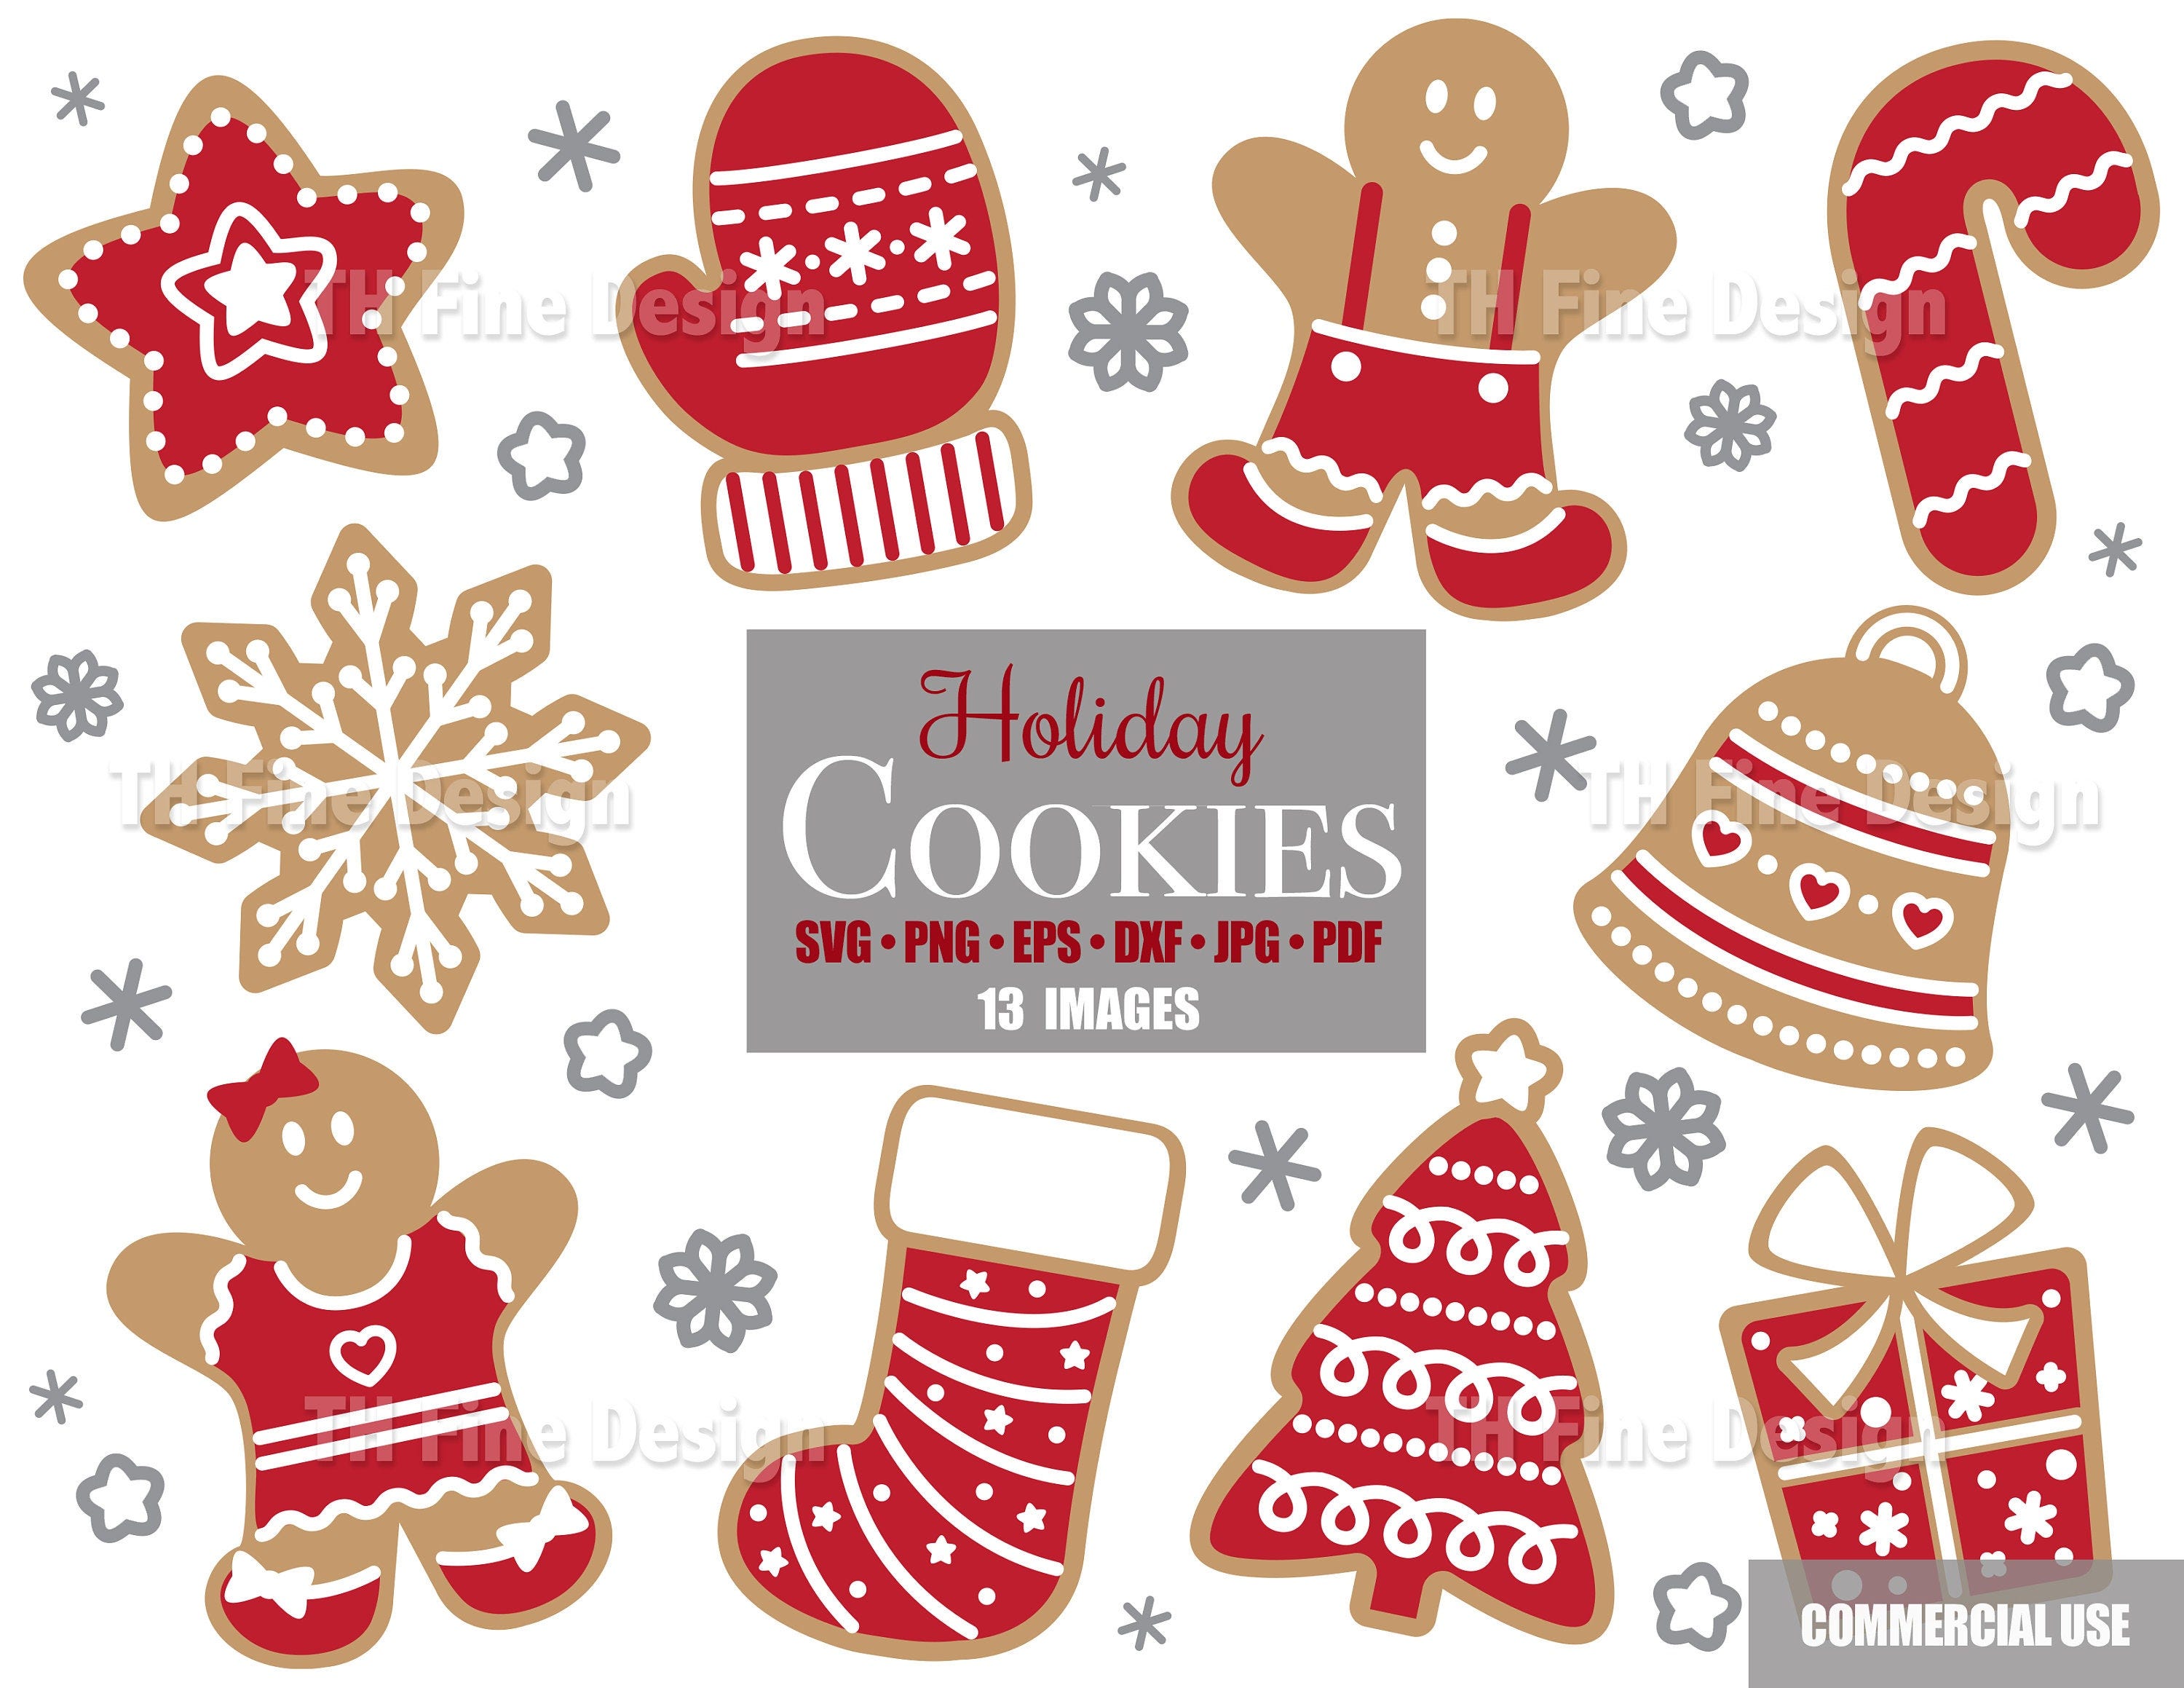 SVG Gingerbread Cookies Holiday Christmas Mitten Bell Star Stocking Candy Cane Tree Cricut Cut File Instant Downloadable Clipart Clip Art